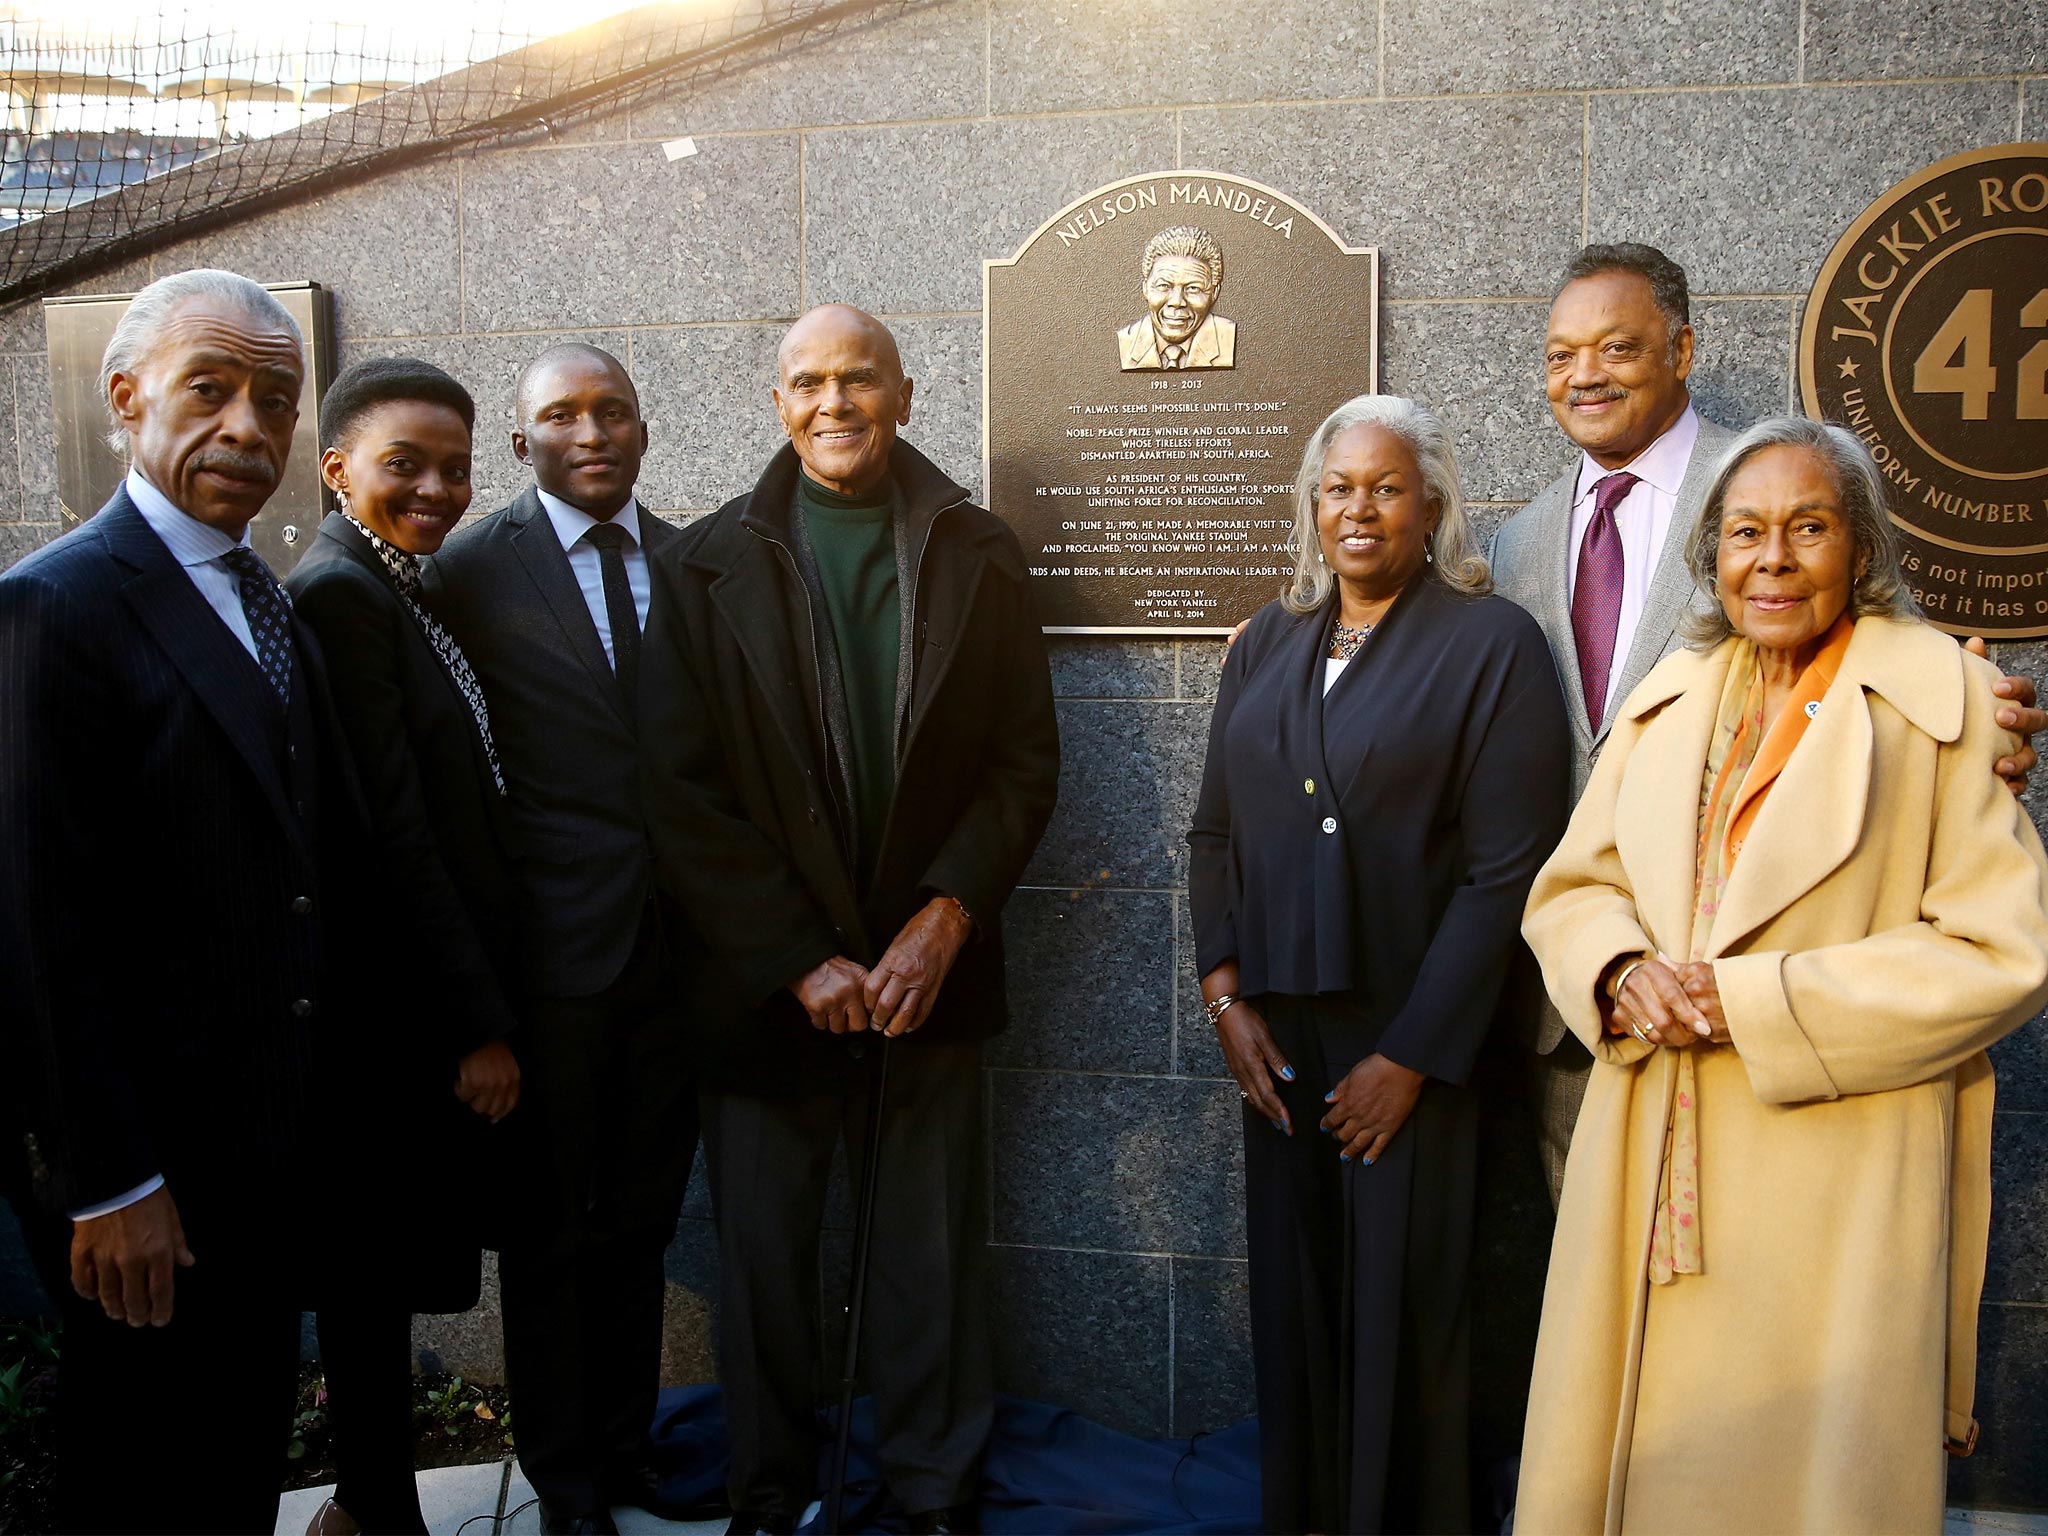 The Rev. Al Sharpton, Lindo Mandela, Zondwa Mandela, Harry Belafonte, Sharon Robinson, the Rev Jesse Jackson and Rachel Robinson, wife of the late baseball great Jackie Robinson, pose with a plaque memorializing the late South African President Nelson Man